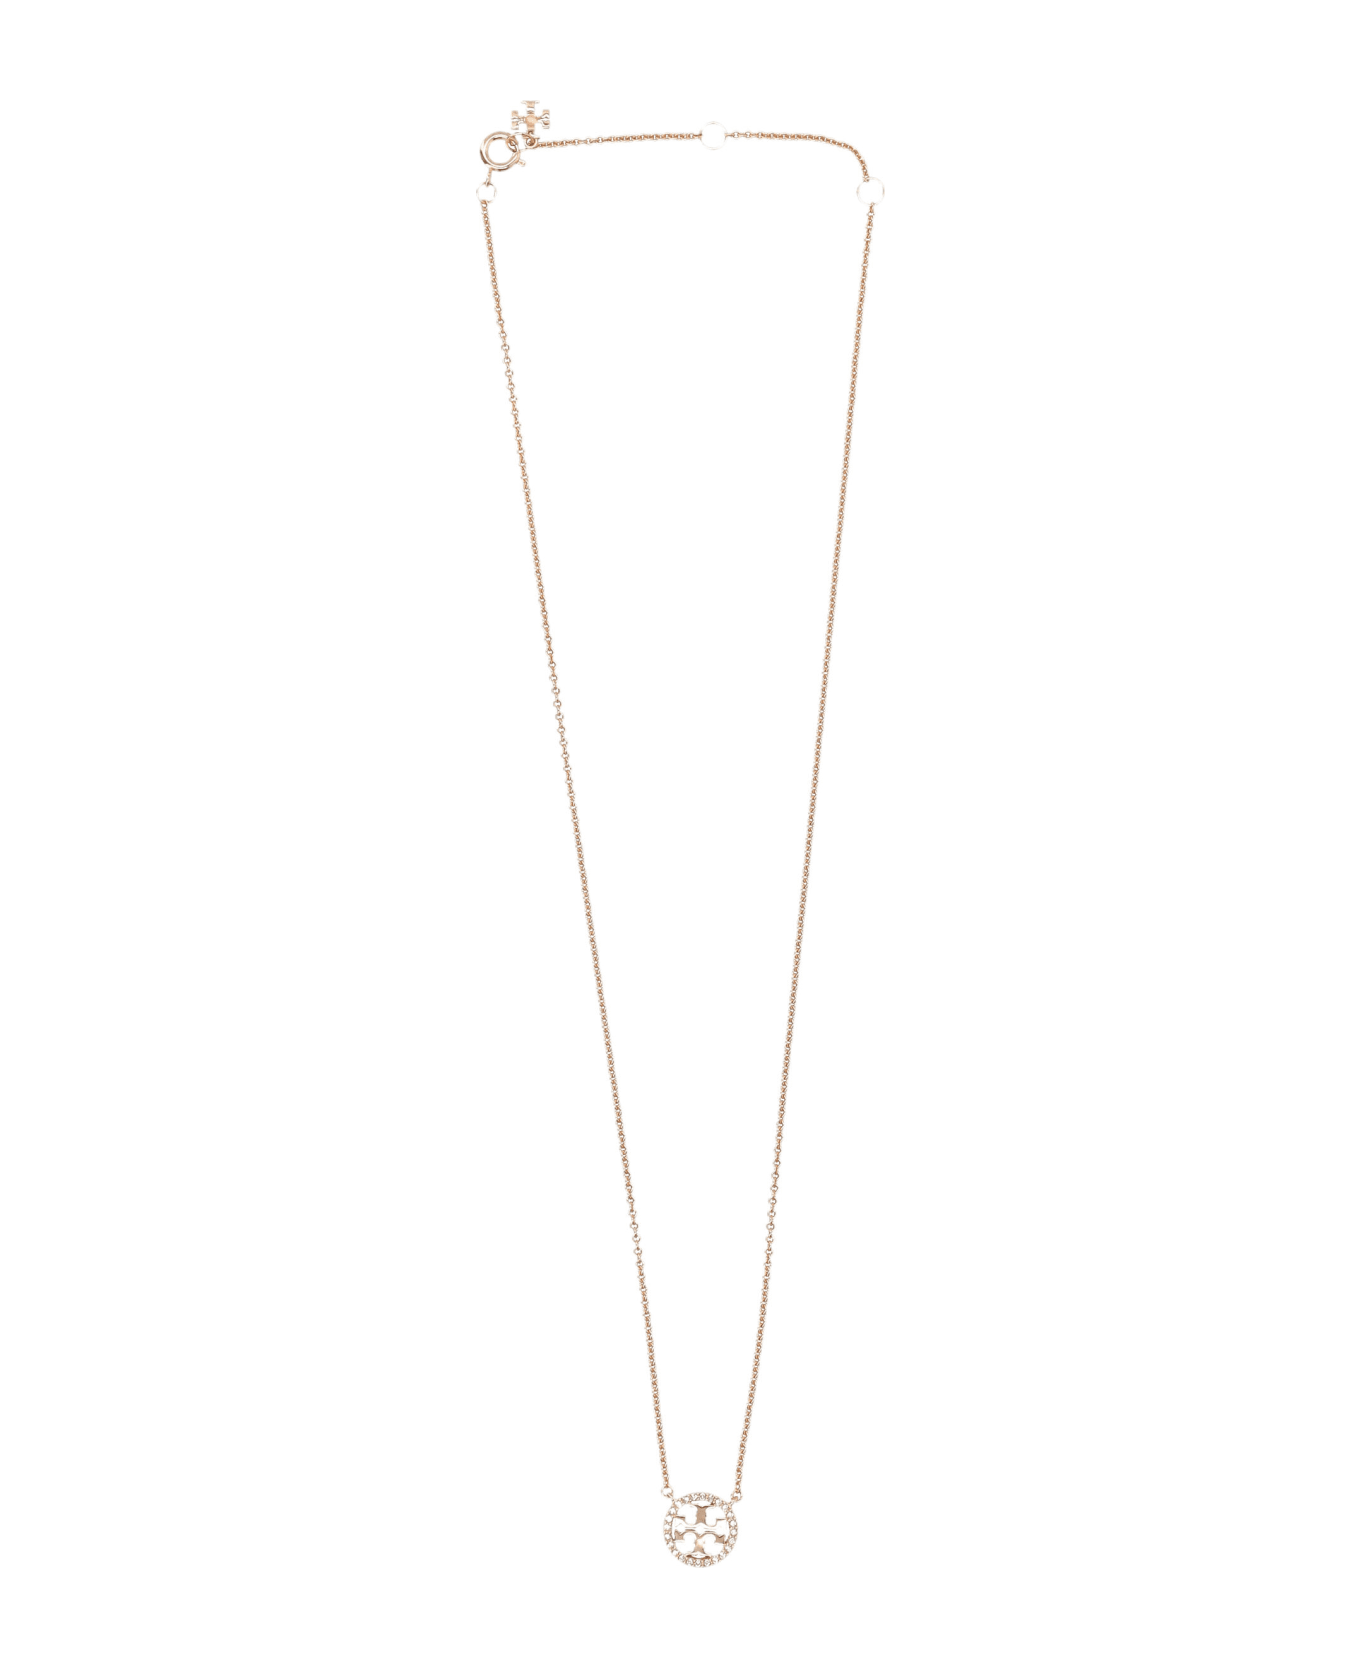 Tory Burch Miller Pave Pendant Necklace - Rose Gold / Crystal